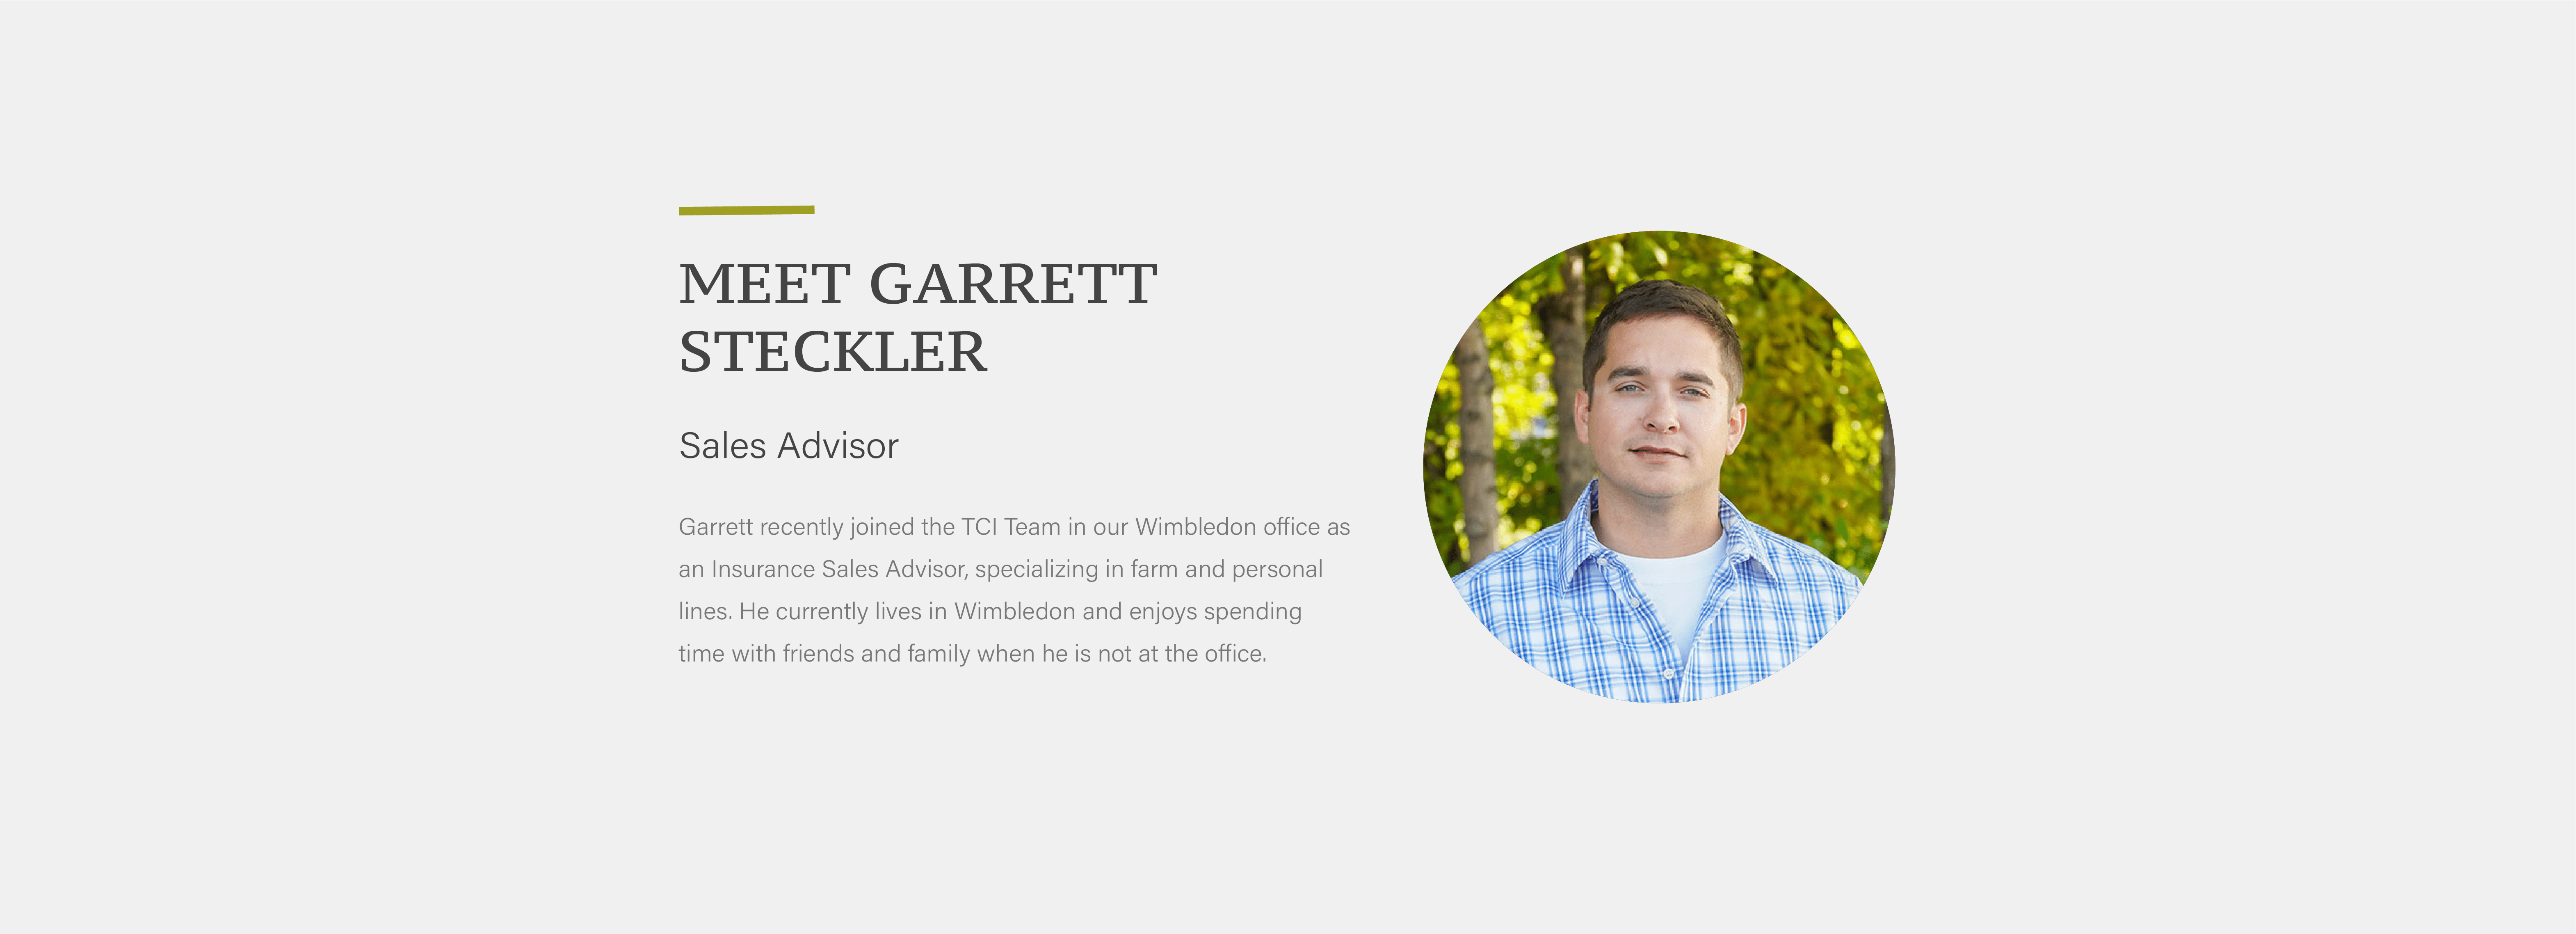 Garrett recently joined the TCI Team in our Wimbledon office as an Insurance Sales Advisor, specializing in farm and personal lines. He currently lives in Wimbledon and enjoys spending time with friends and family when he is not at the office.